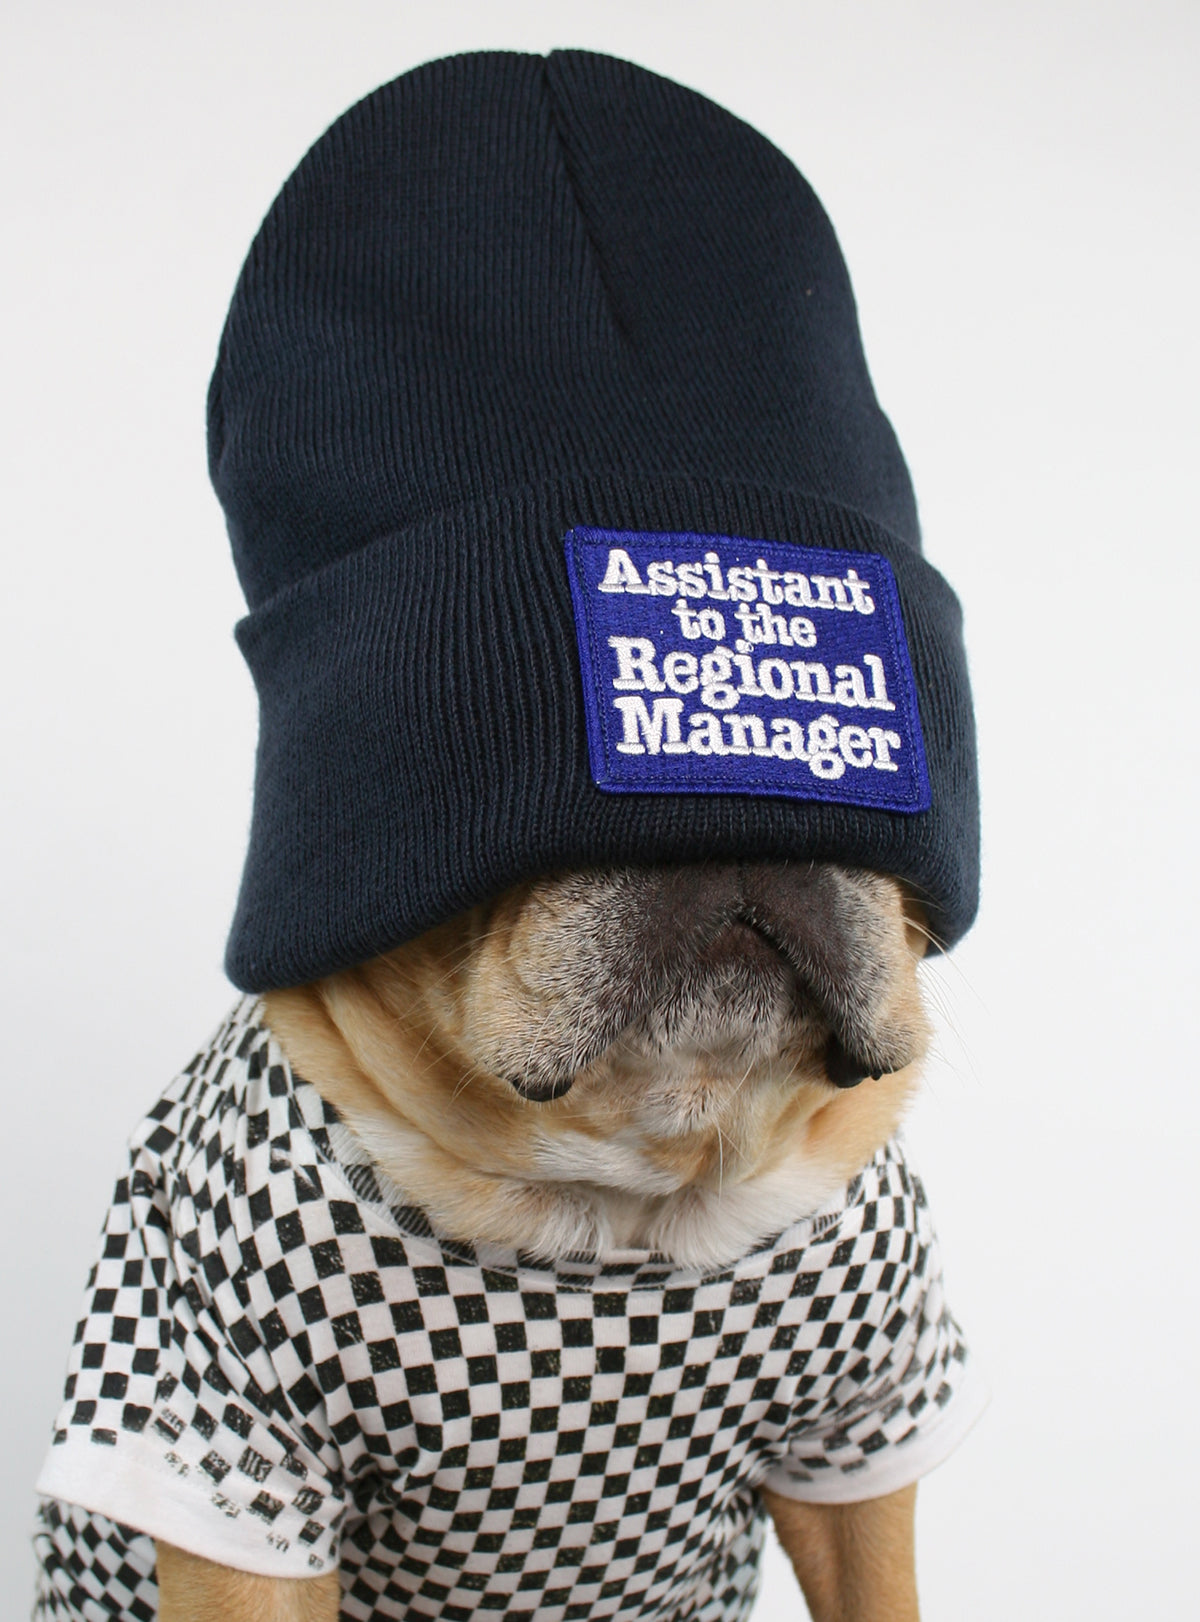 Assistant to the Regional Manager Beanie